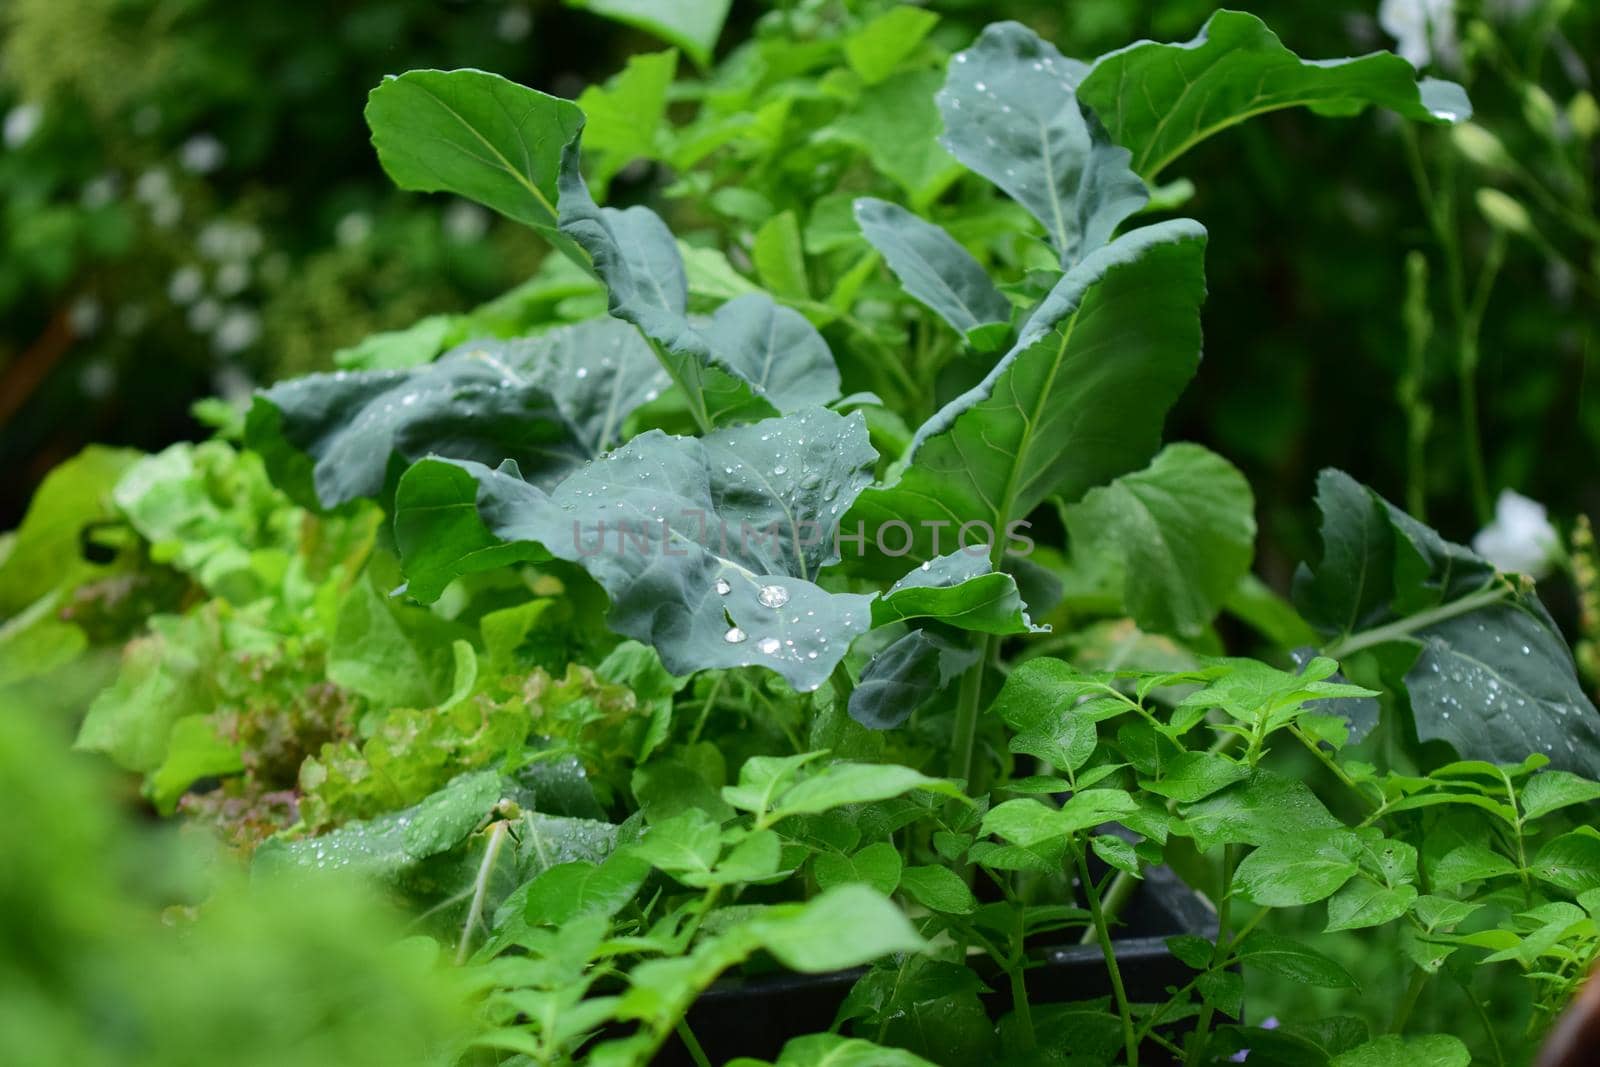 Mixed green growing vegetables outside in the rain